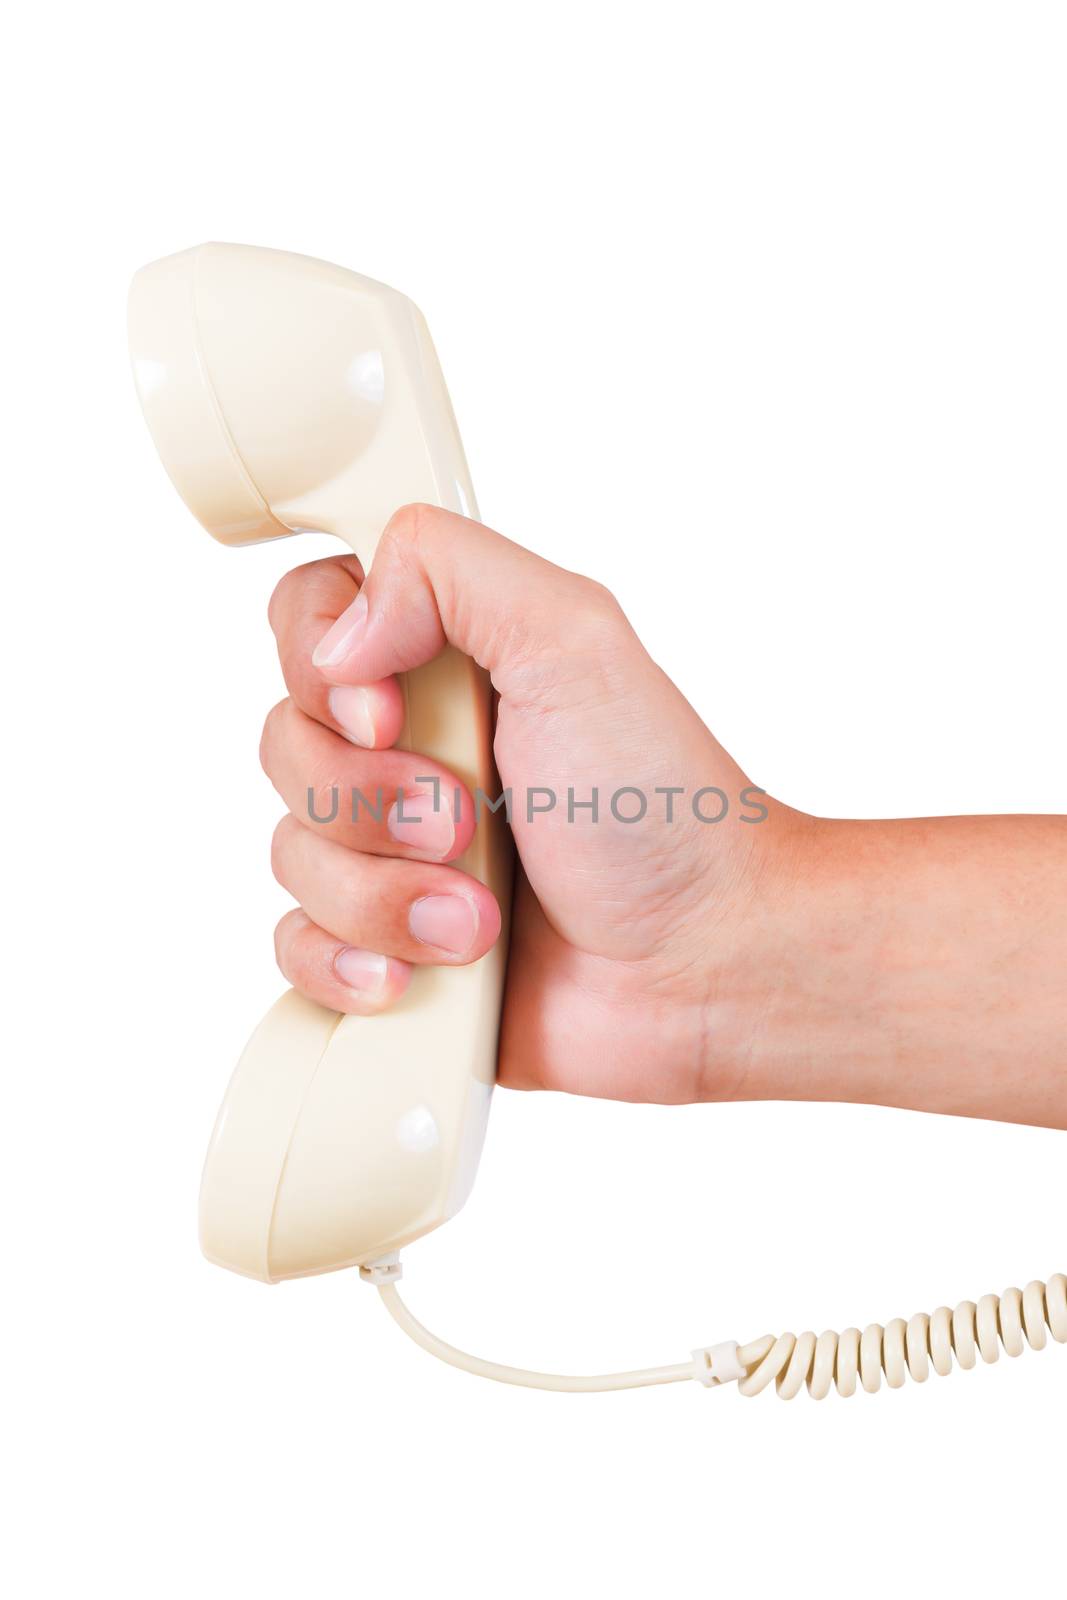 Retro rotary vintage telephone and hand on white background